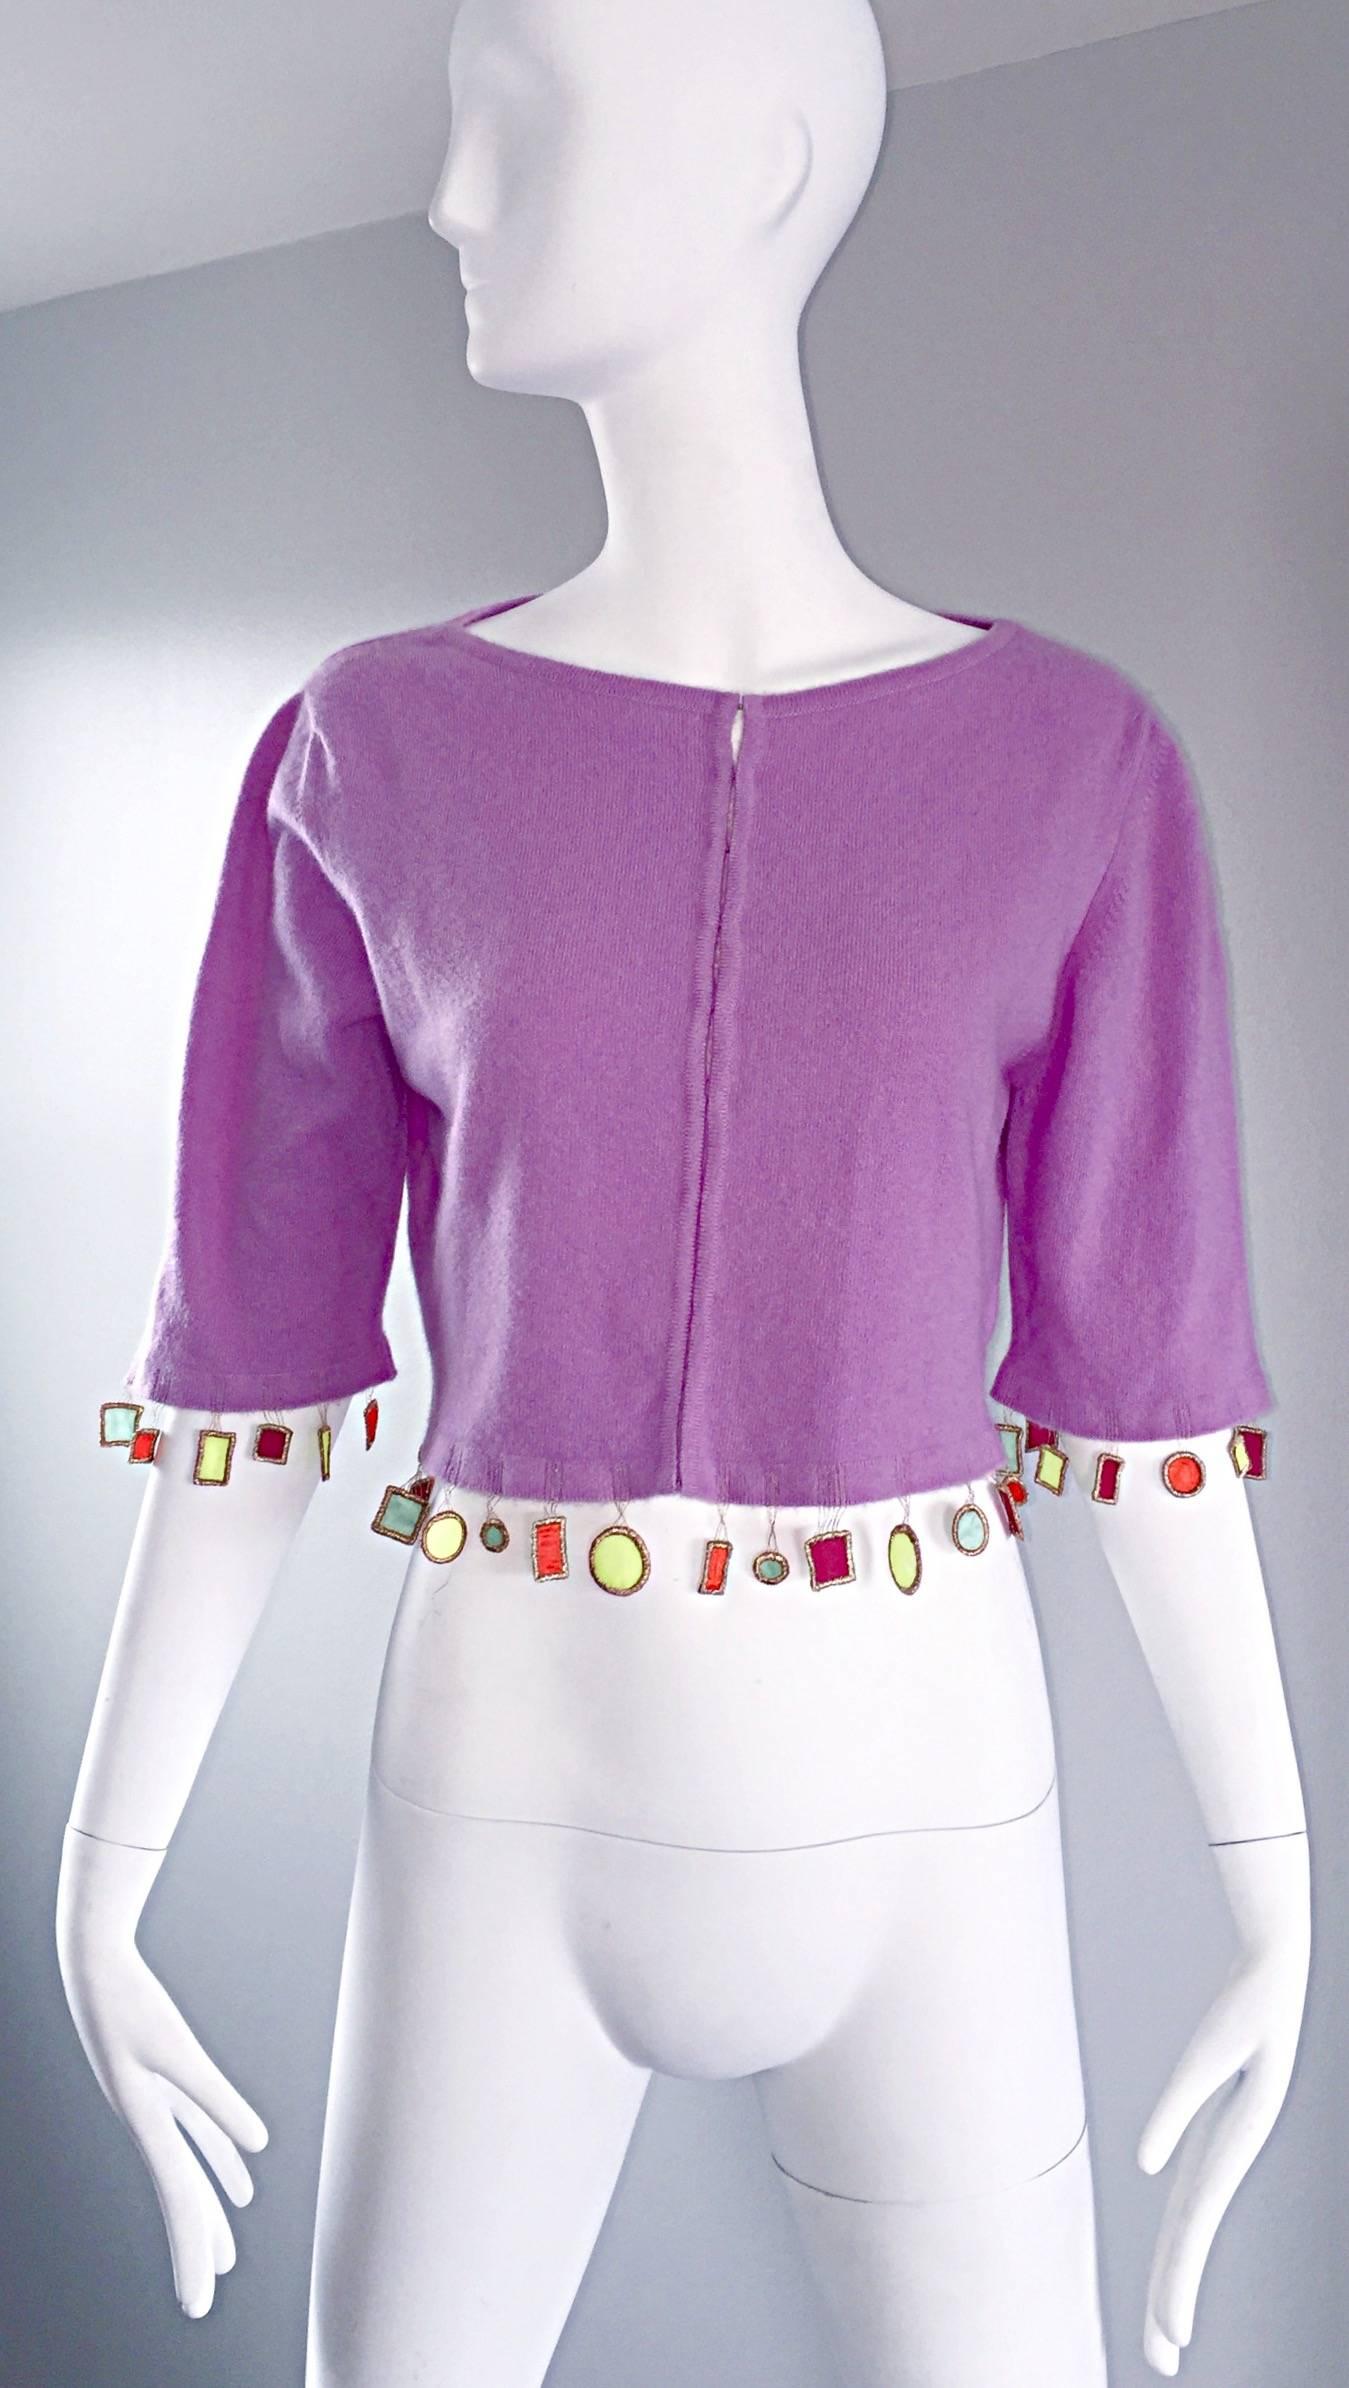 Whimsical MATTHEW WILLIAMSON lilac light purple cashmere cardigan sweater! Luxurious Scotish cashmere feels amazing against the skin! Neon appliqués along the front and back hem, and at the sleeve cuffs. Hook-and-eye closure up the bodice. The